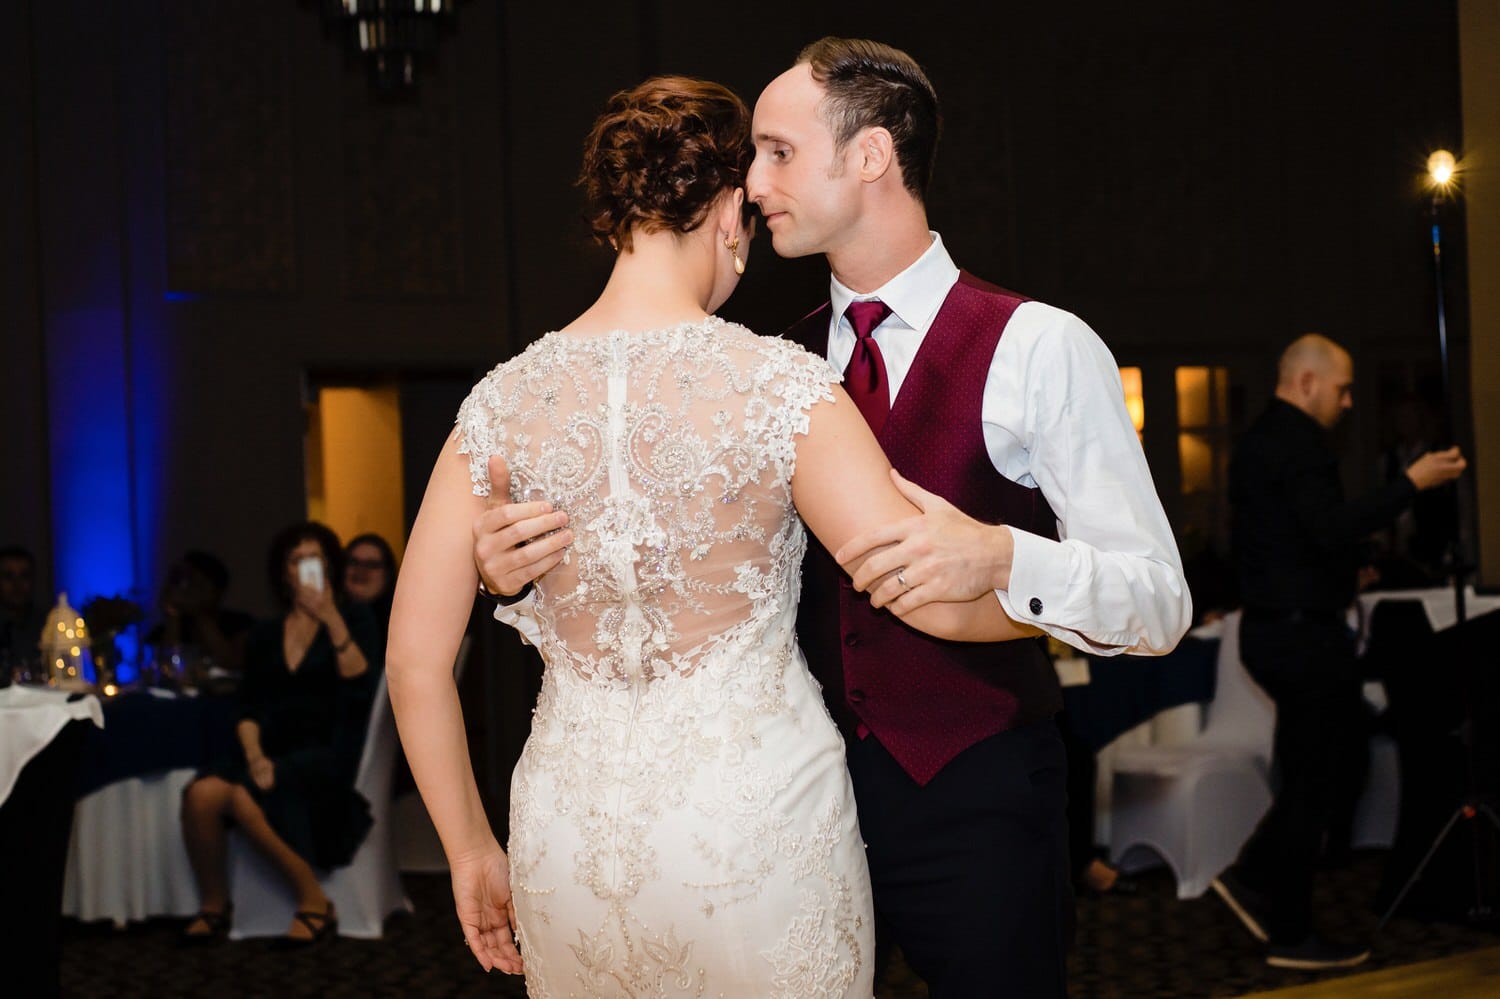 A colorful, candid picture of a groom delicately holding his bride during the waltz they do for their first dance during their wedding reception at The Elms. 